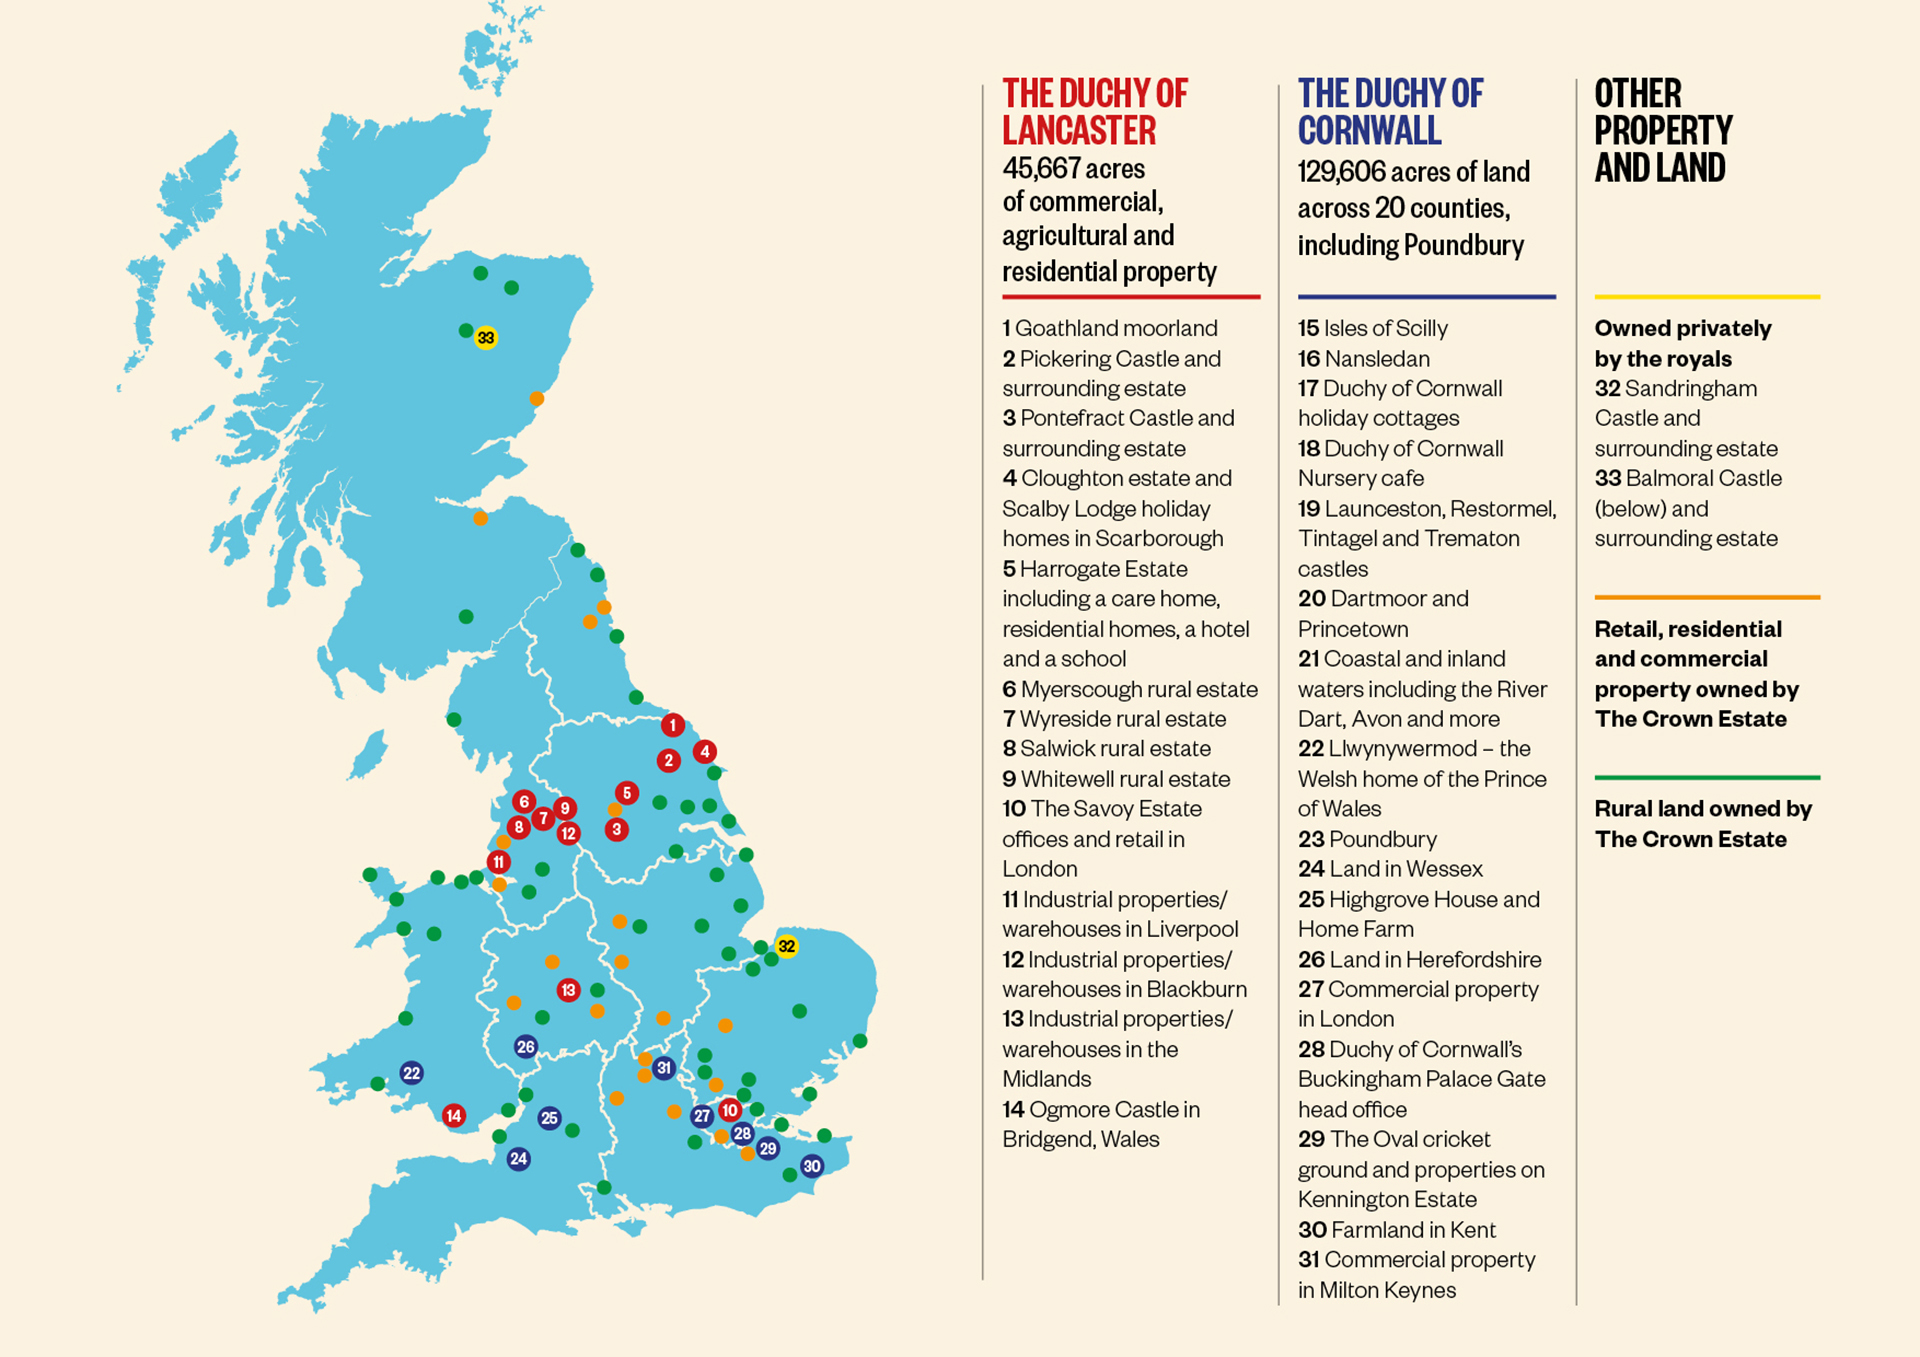 Map of royal-owned property in the Uk